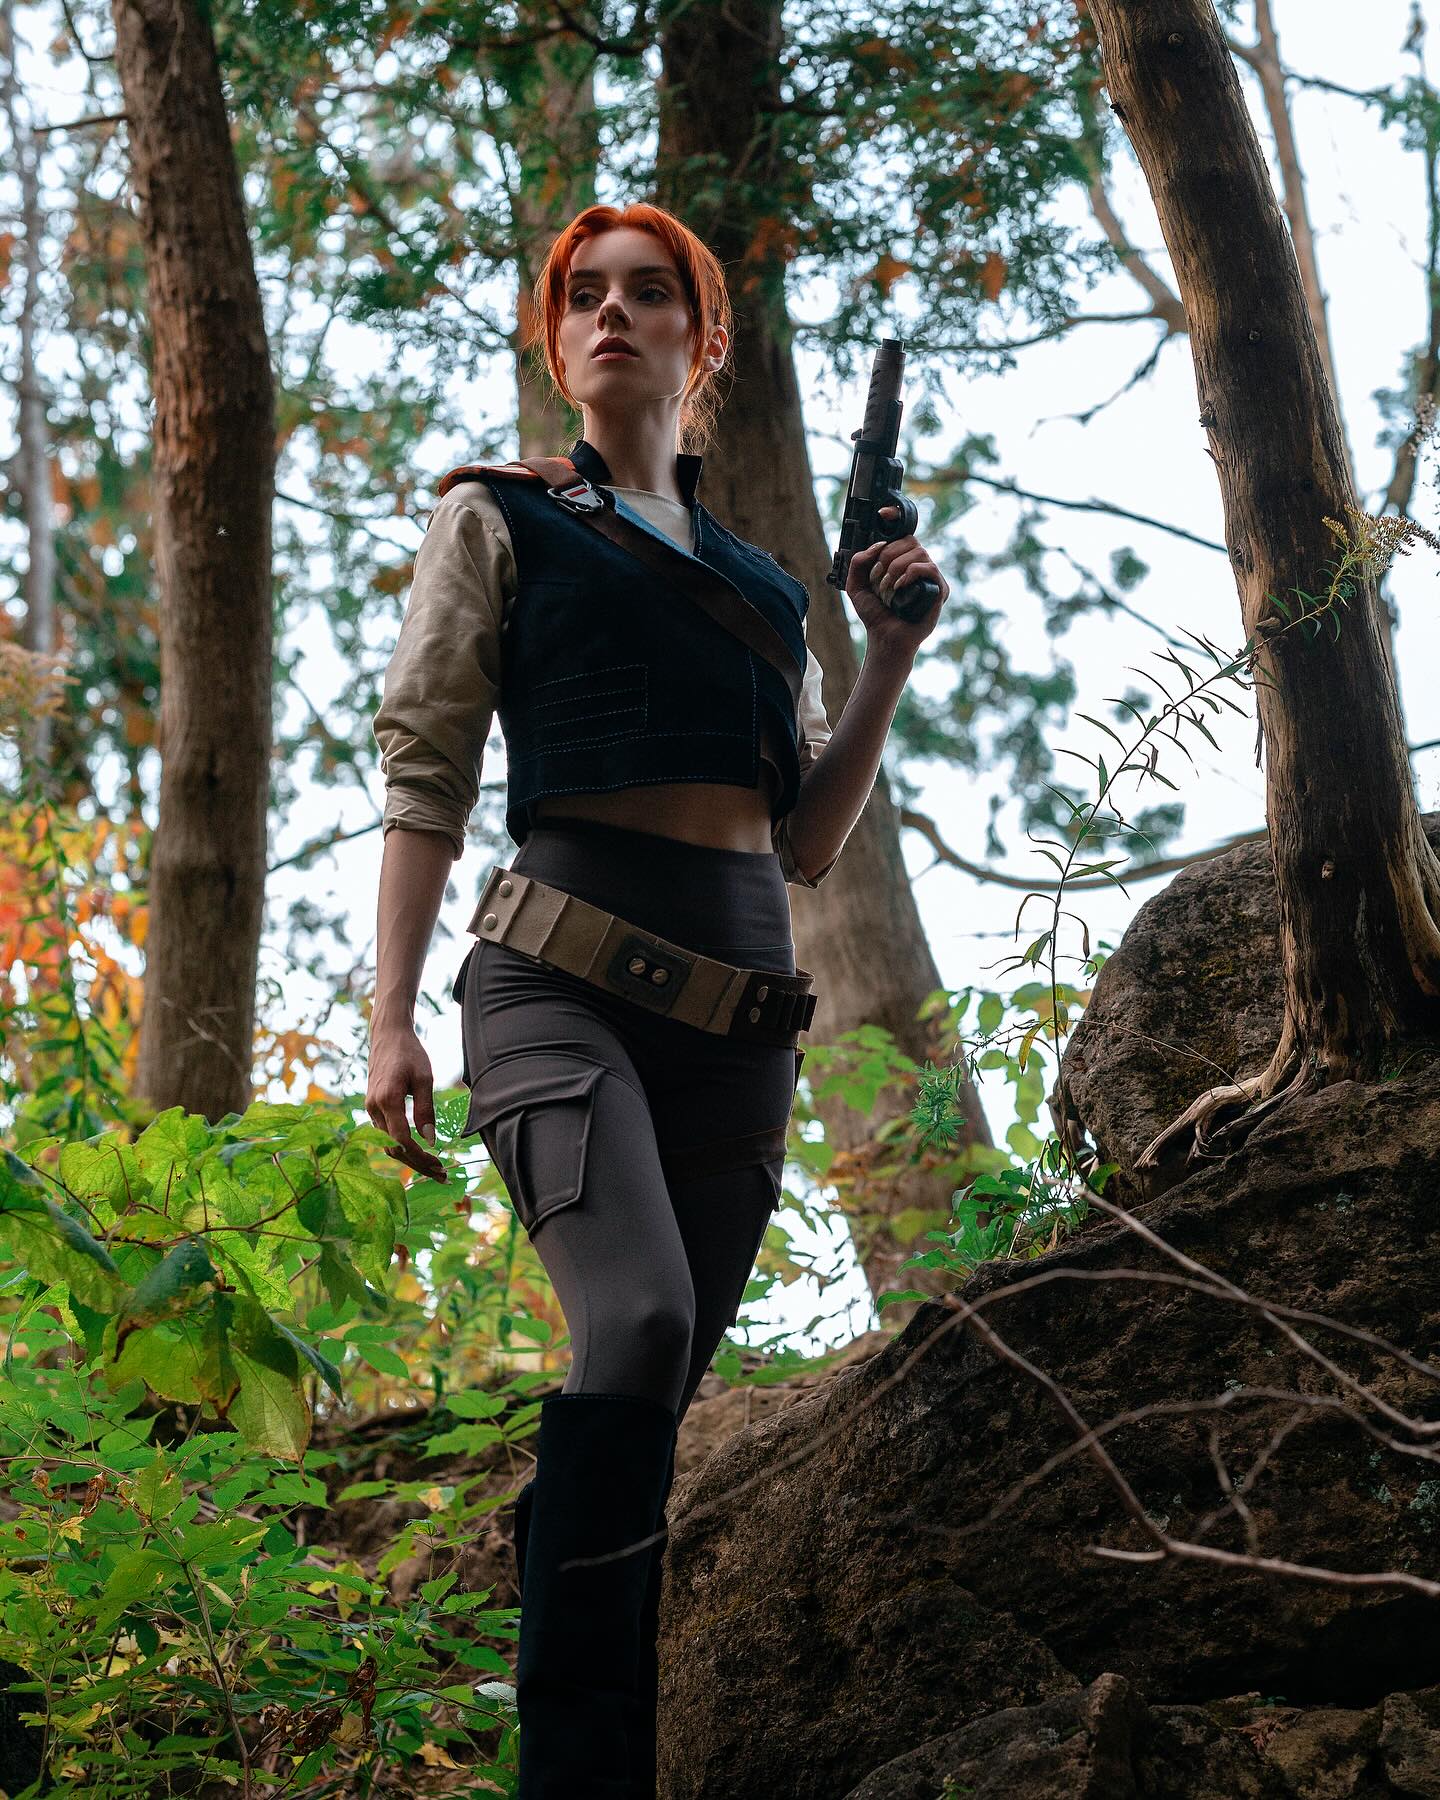 One more before Star Wars day is done - some of my Star Wars cosplays ♥️

Shot by @saffelsphotography, @dreamlifestylephotography and @lxe.photo 

Body paint and prosthetics by @keltonfx 

#starwars #maythe4thbewithyou #starwarsday #starwarsnerd #starwarsfan #redhead